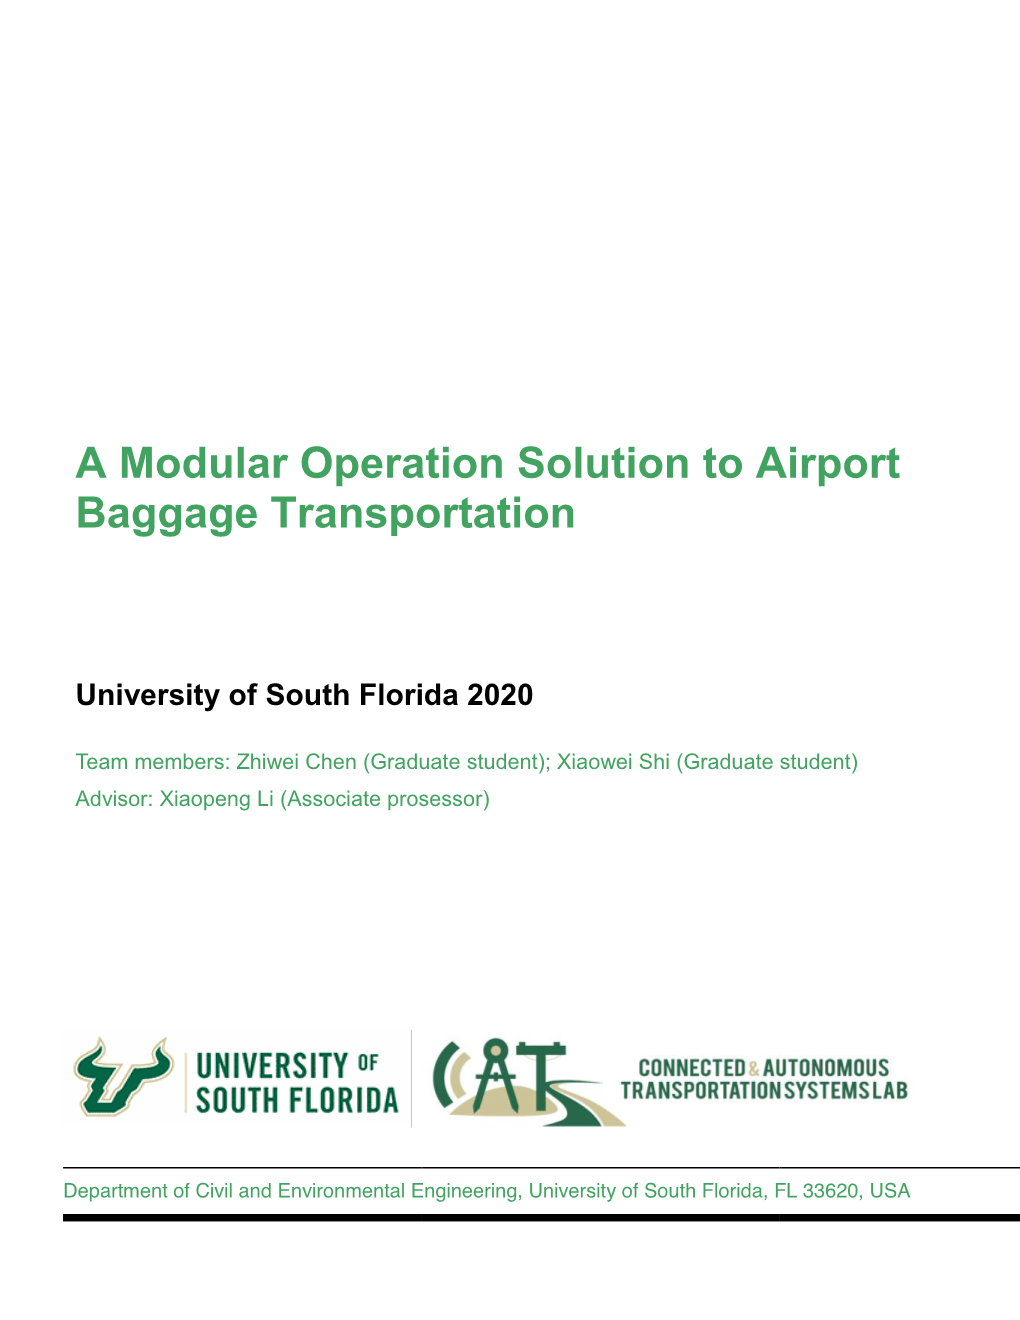 A Modular Operation Solution to Airport Baggage Transportation